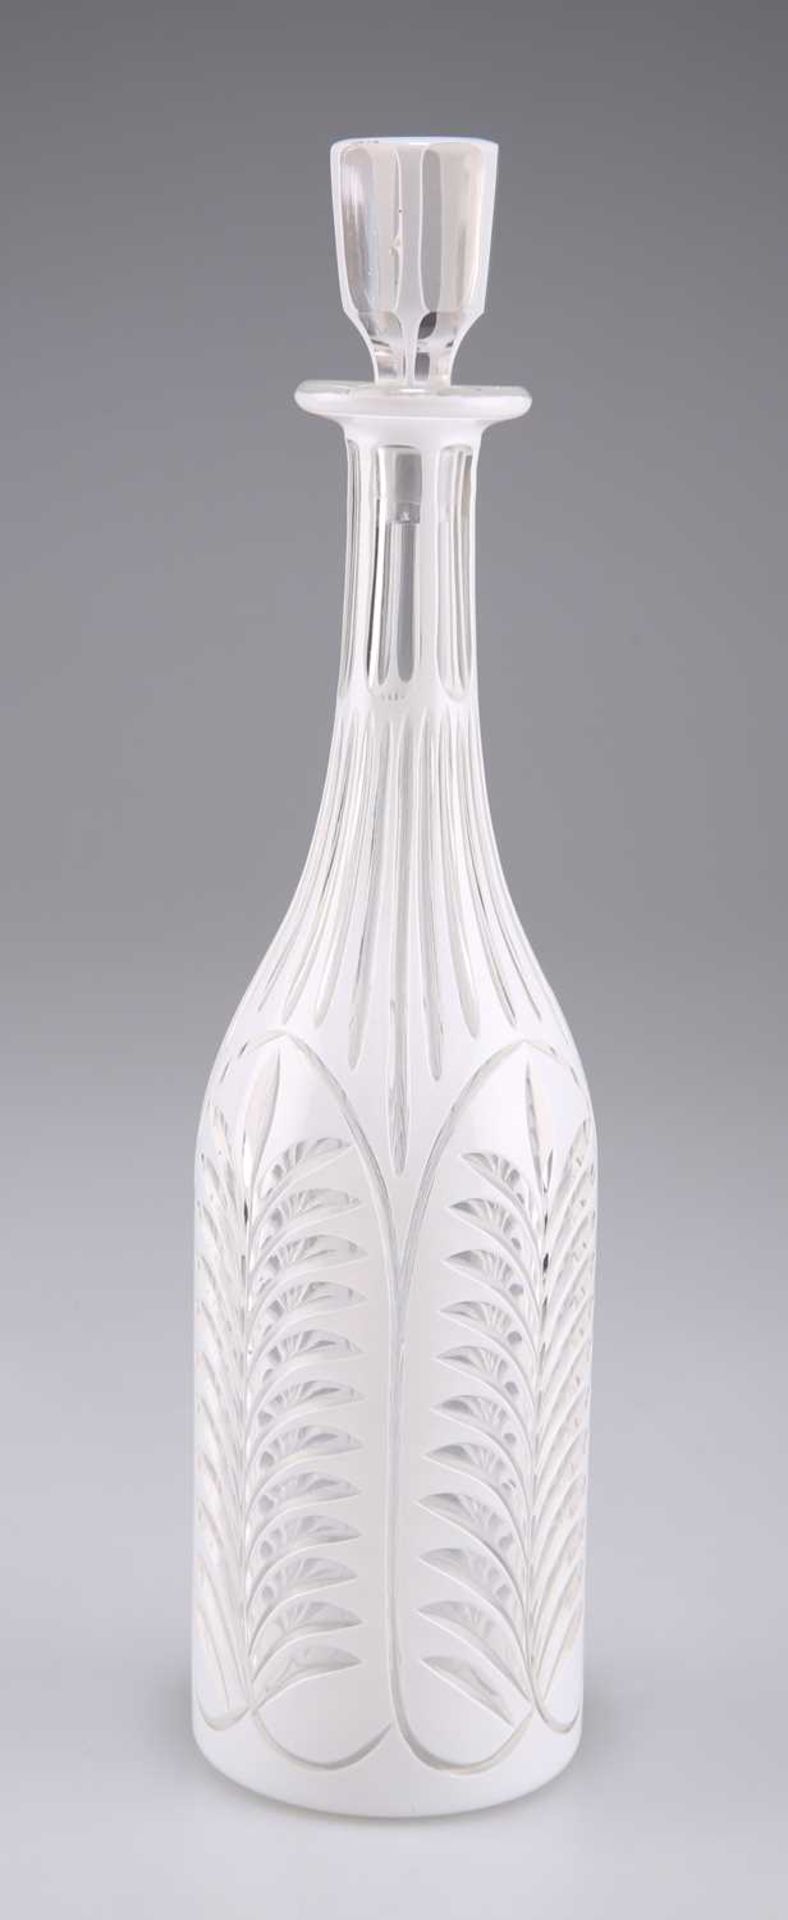 A 19TH CENTURY BOHEMIAN OVERLAY GLASS DECANTER - Image 2 of 2